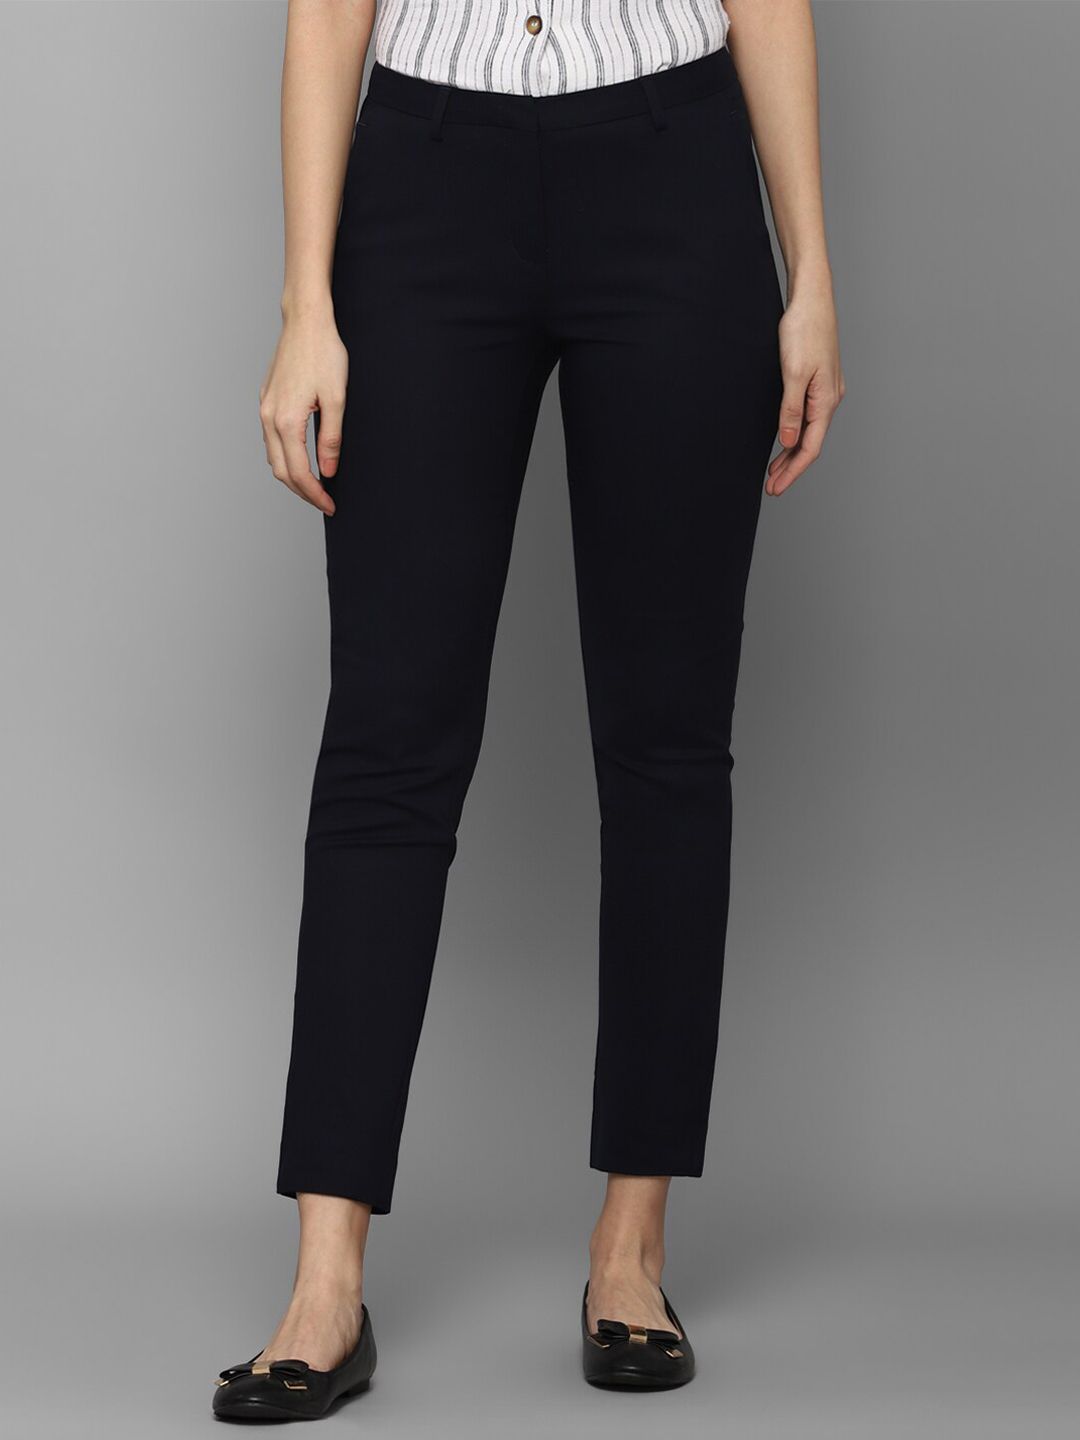 Allen Solly Woman Women Black Trousers Price in India